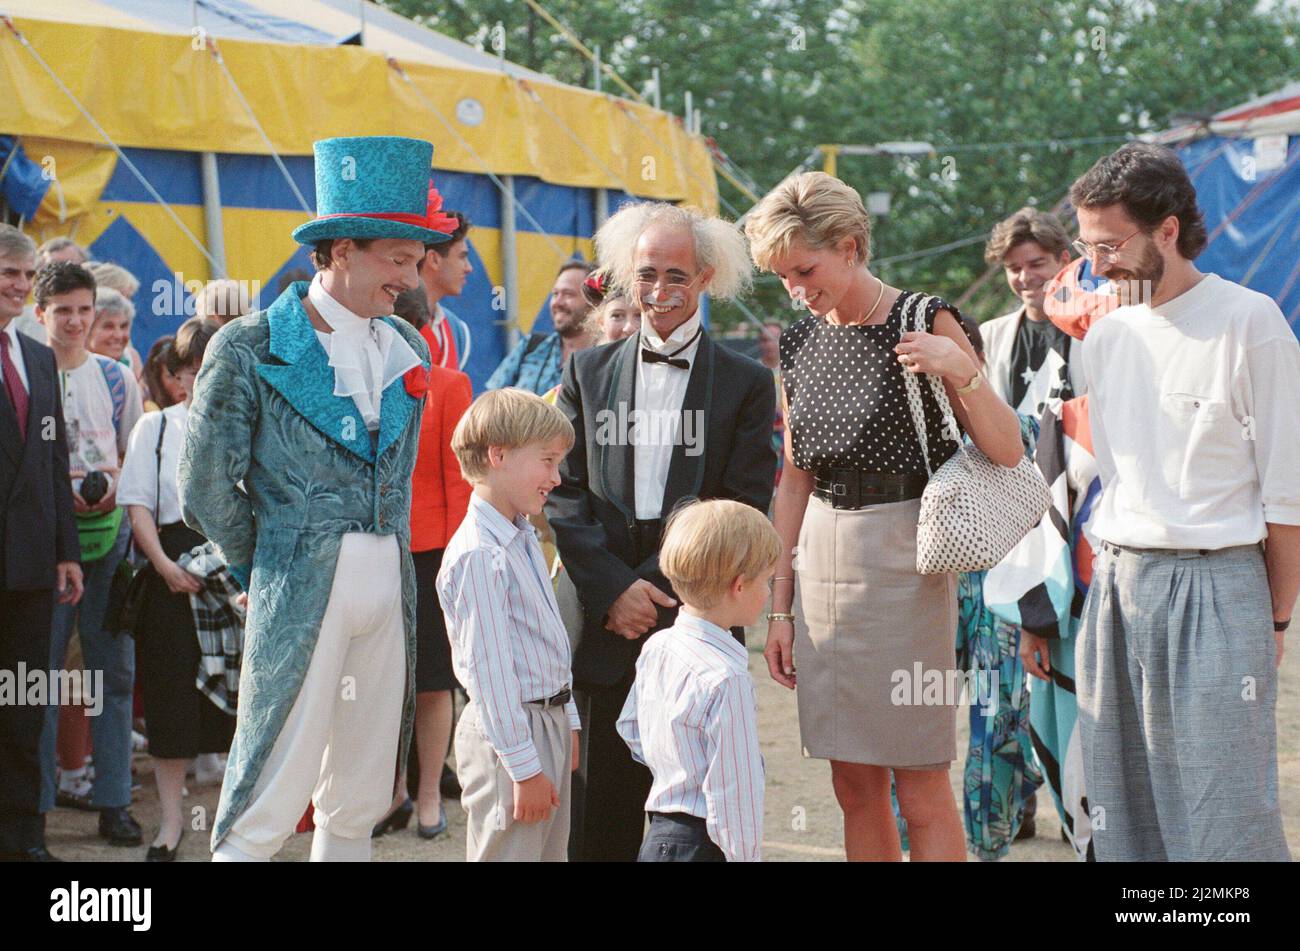 HRH The Princess of Wales, Princess Diana, along with her songs William and Harry enjoy the day atLe Cirque du Soleil, the Children's Circus.  Picture taken 8th August 1990 Stock Photo